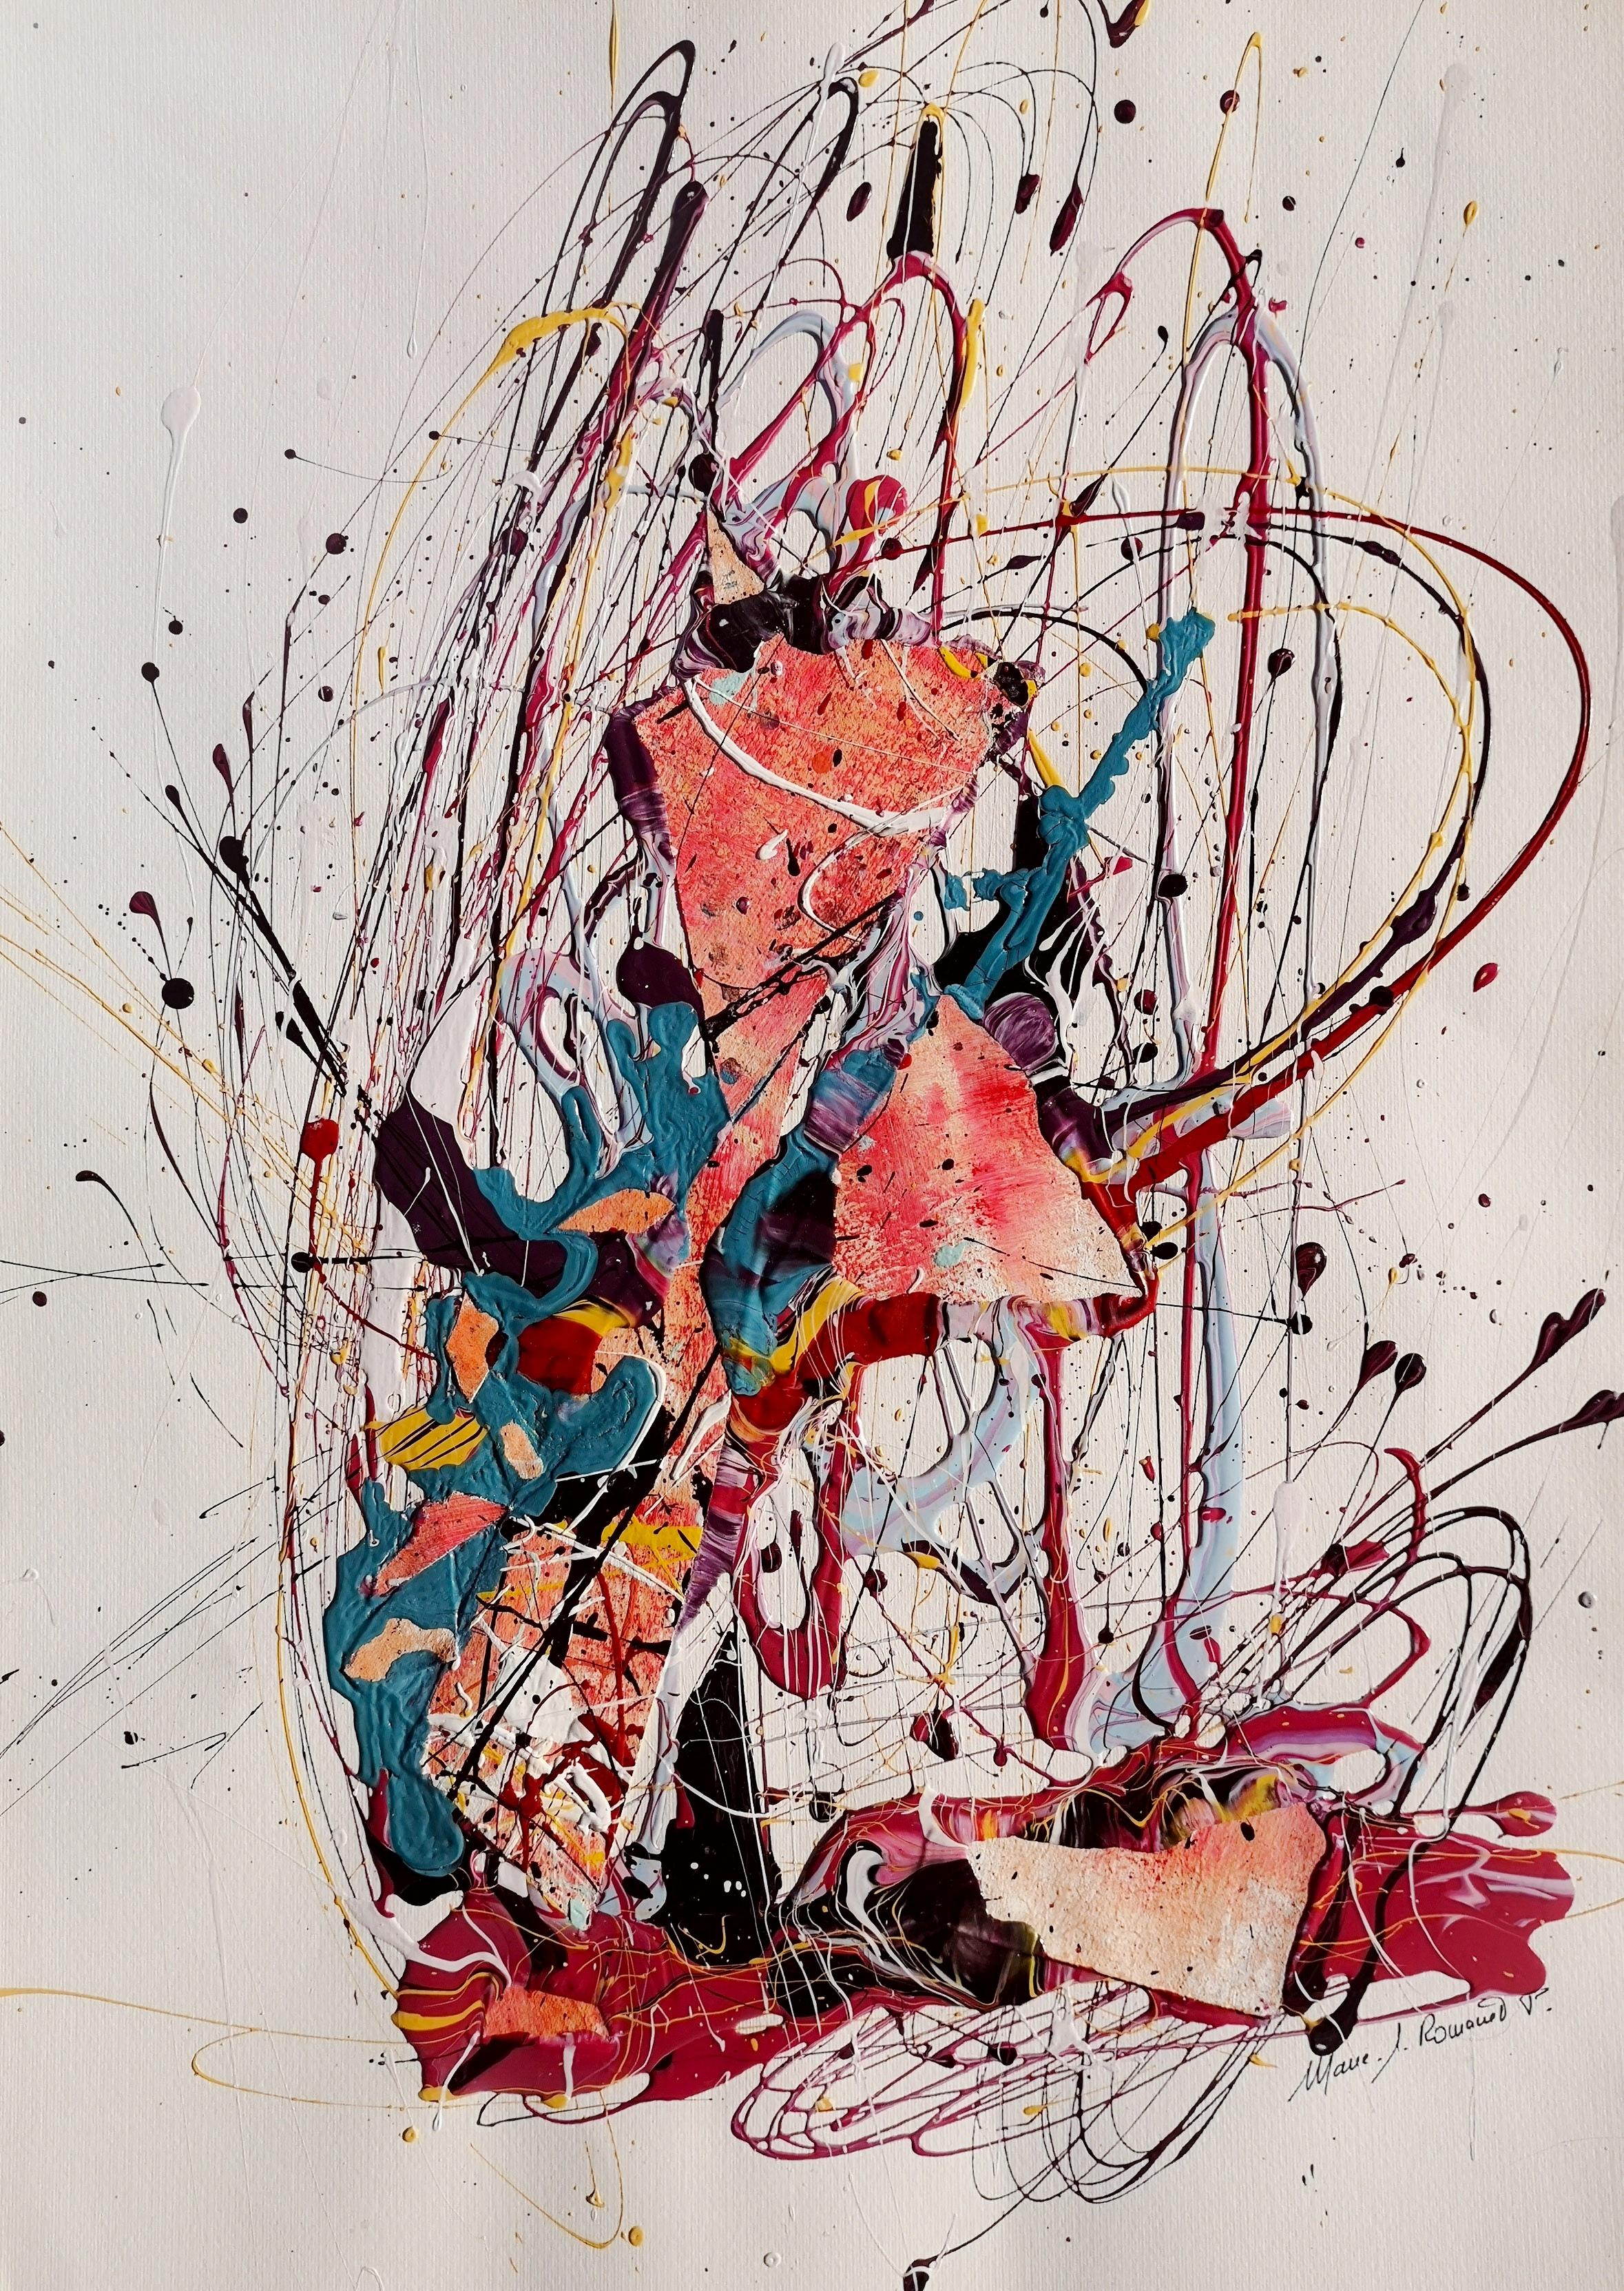 Marie-Laure Romanet Prin company Abstract Painting - "MUSICIENNE DANS L'AME"  Pollock style